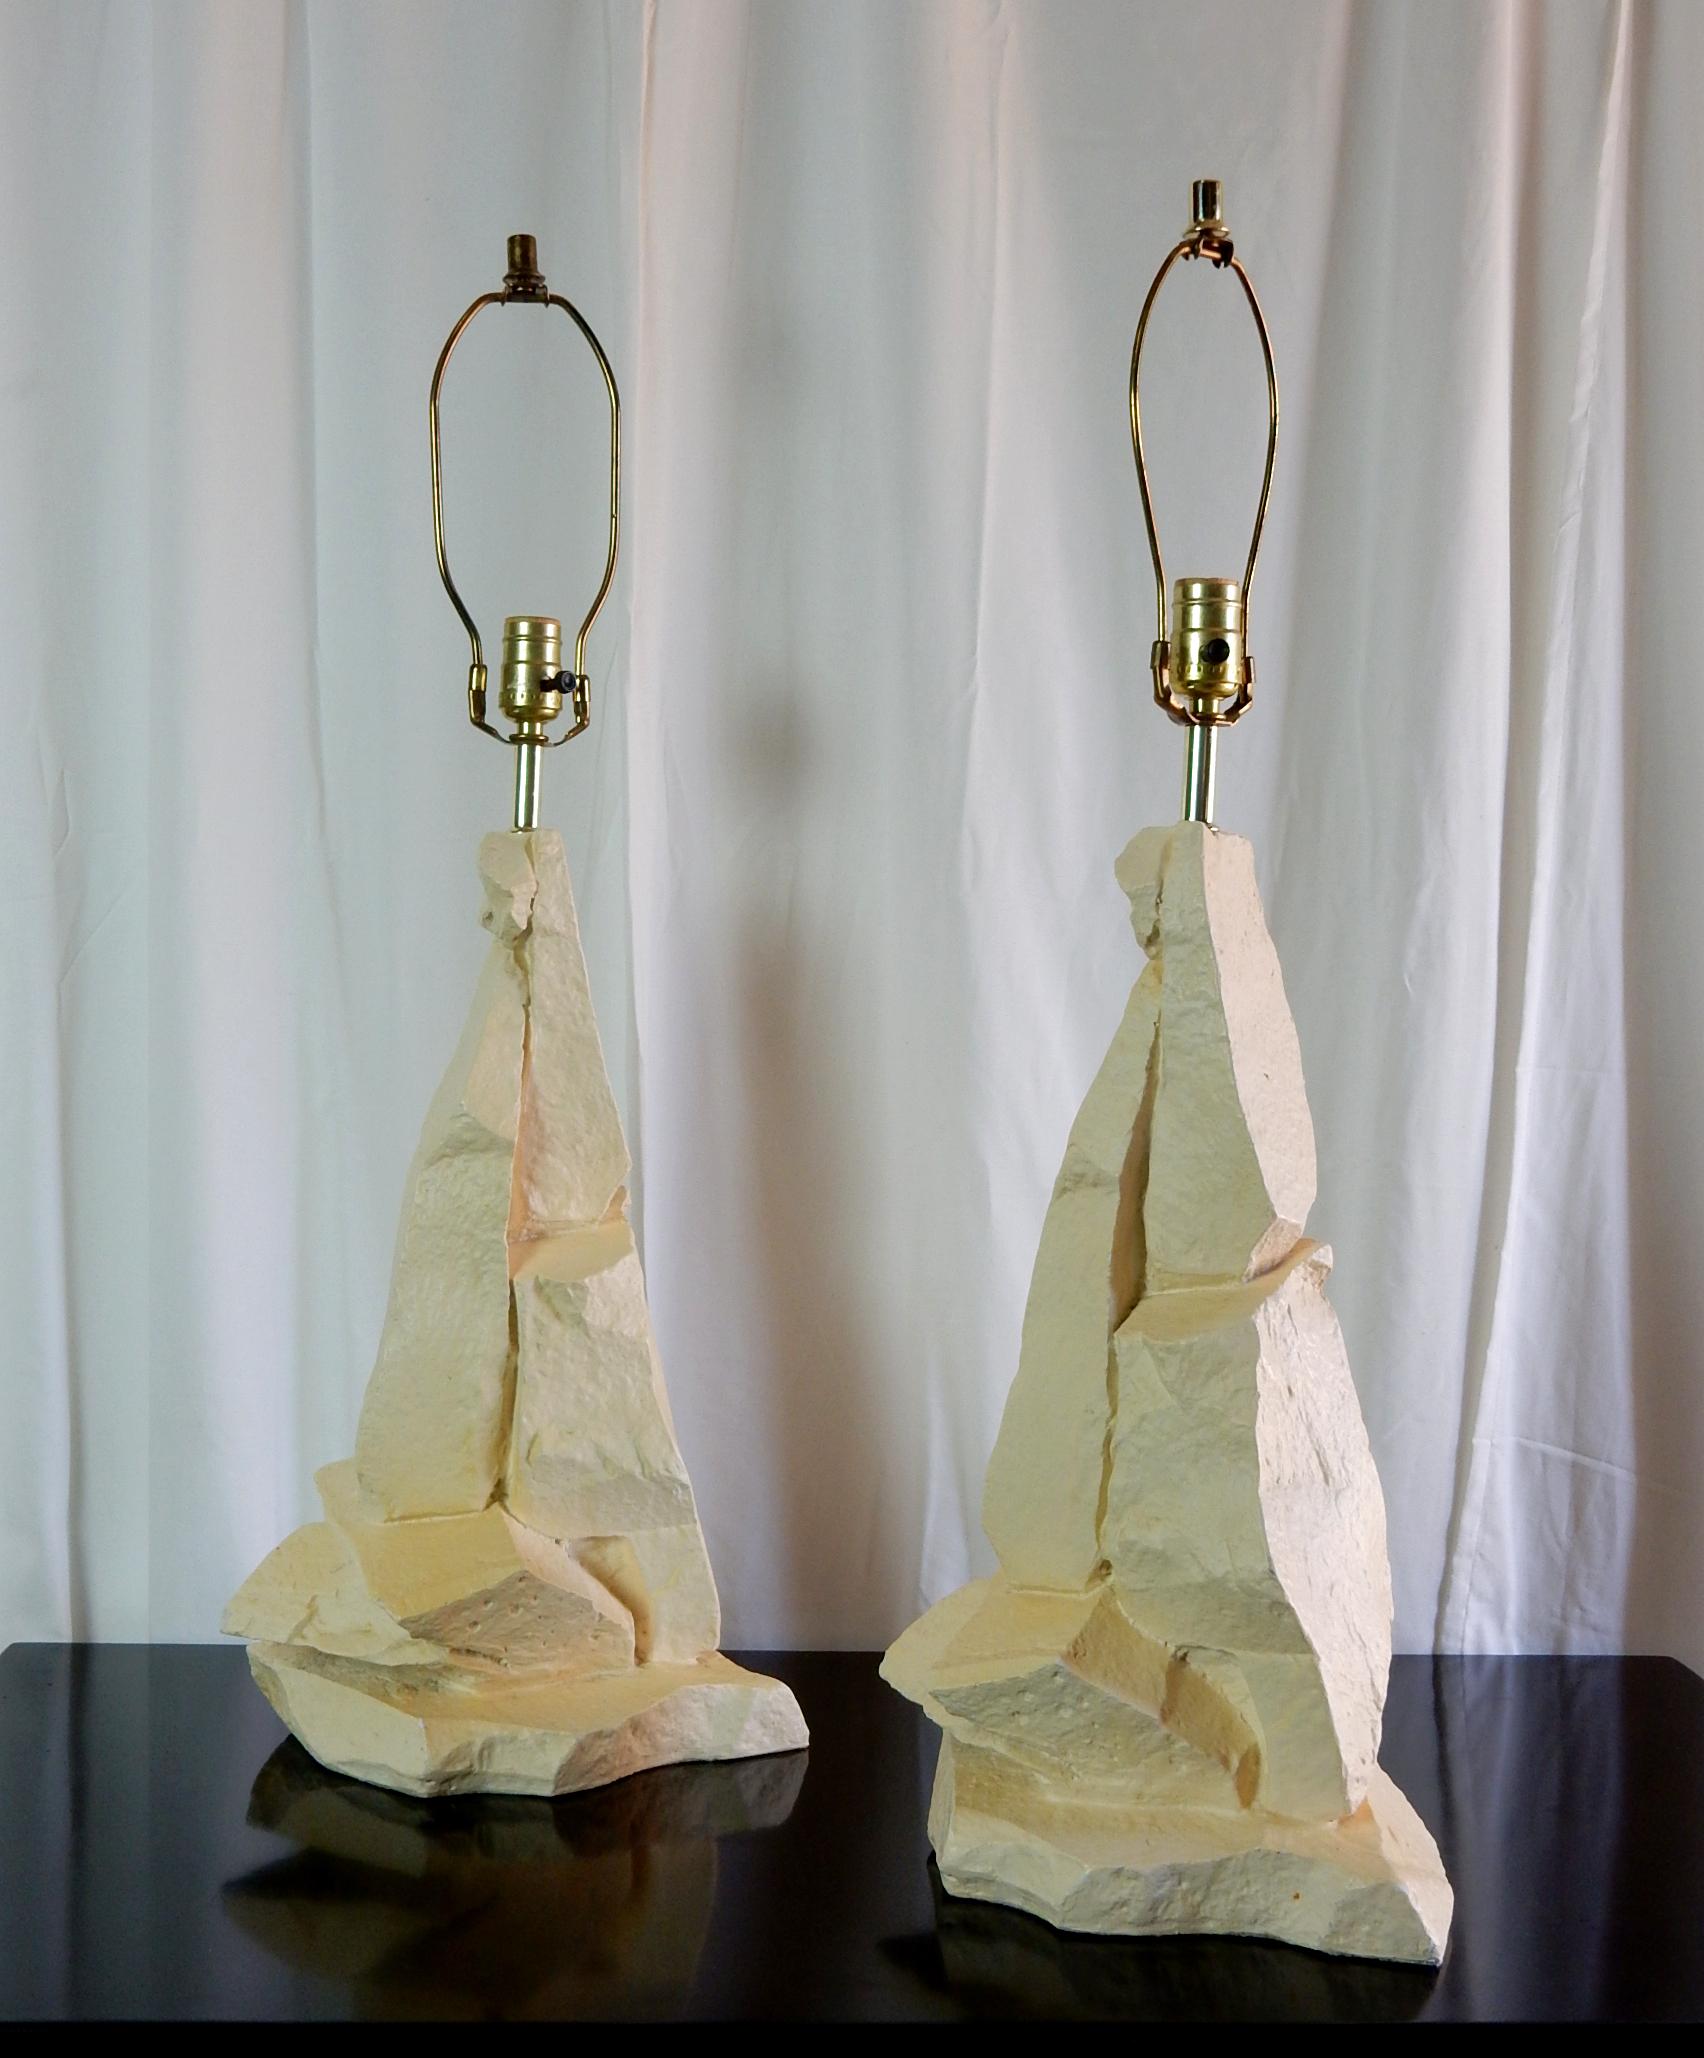 A pair of abstract stacked quarry plaster rocks table lamps by Sirmos.
Striking multifaceted sculptures formed of thick plaster with matte enamel limestone finish.
Completely original finish. No cracks or repairs.
Brass hardware.